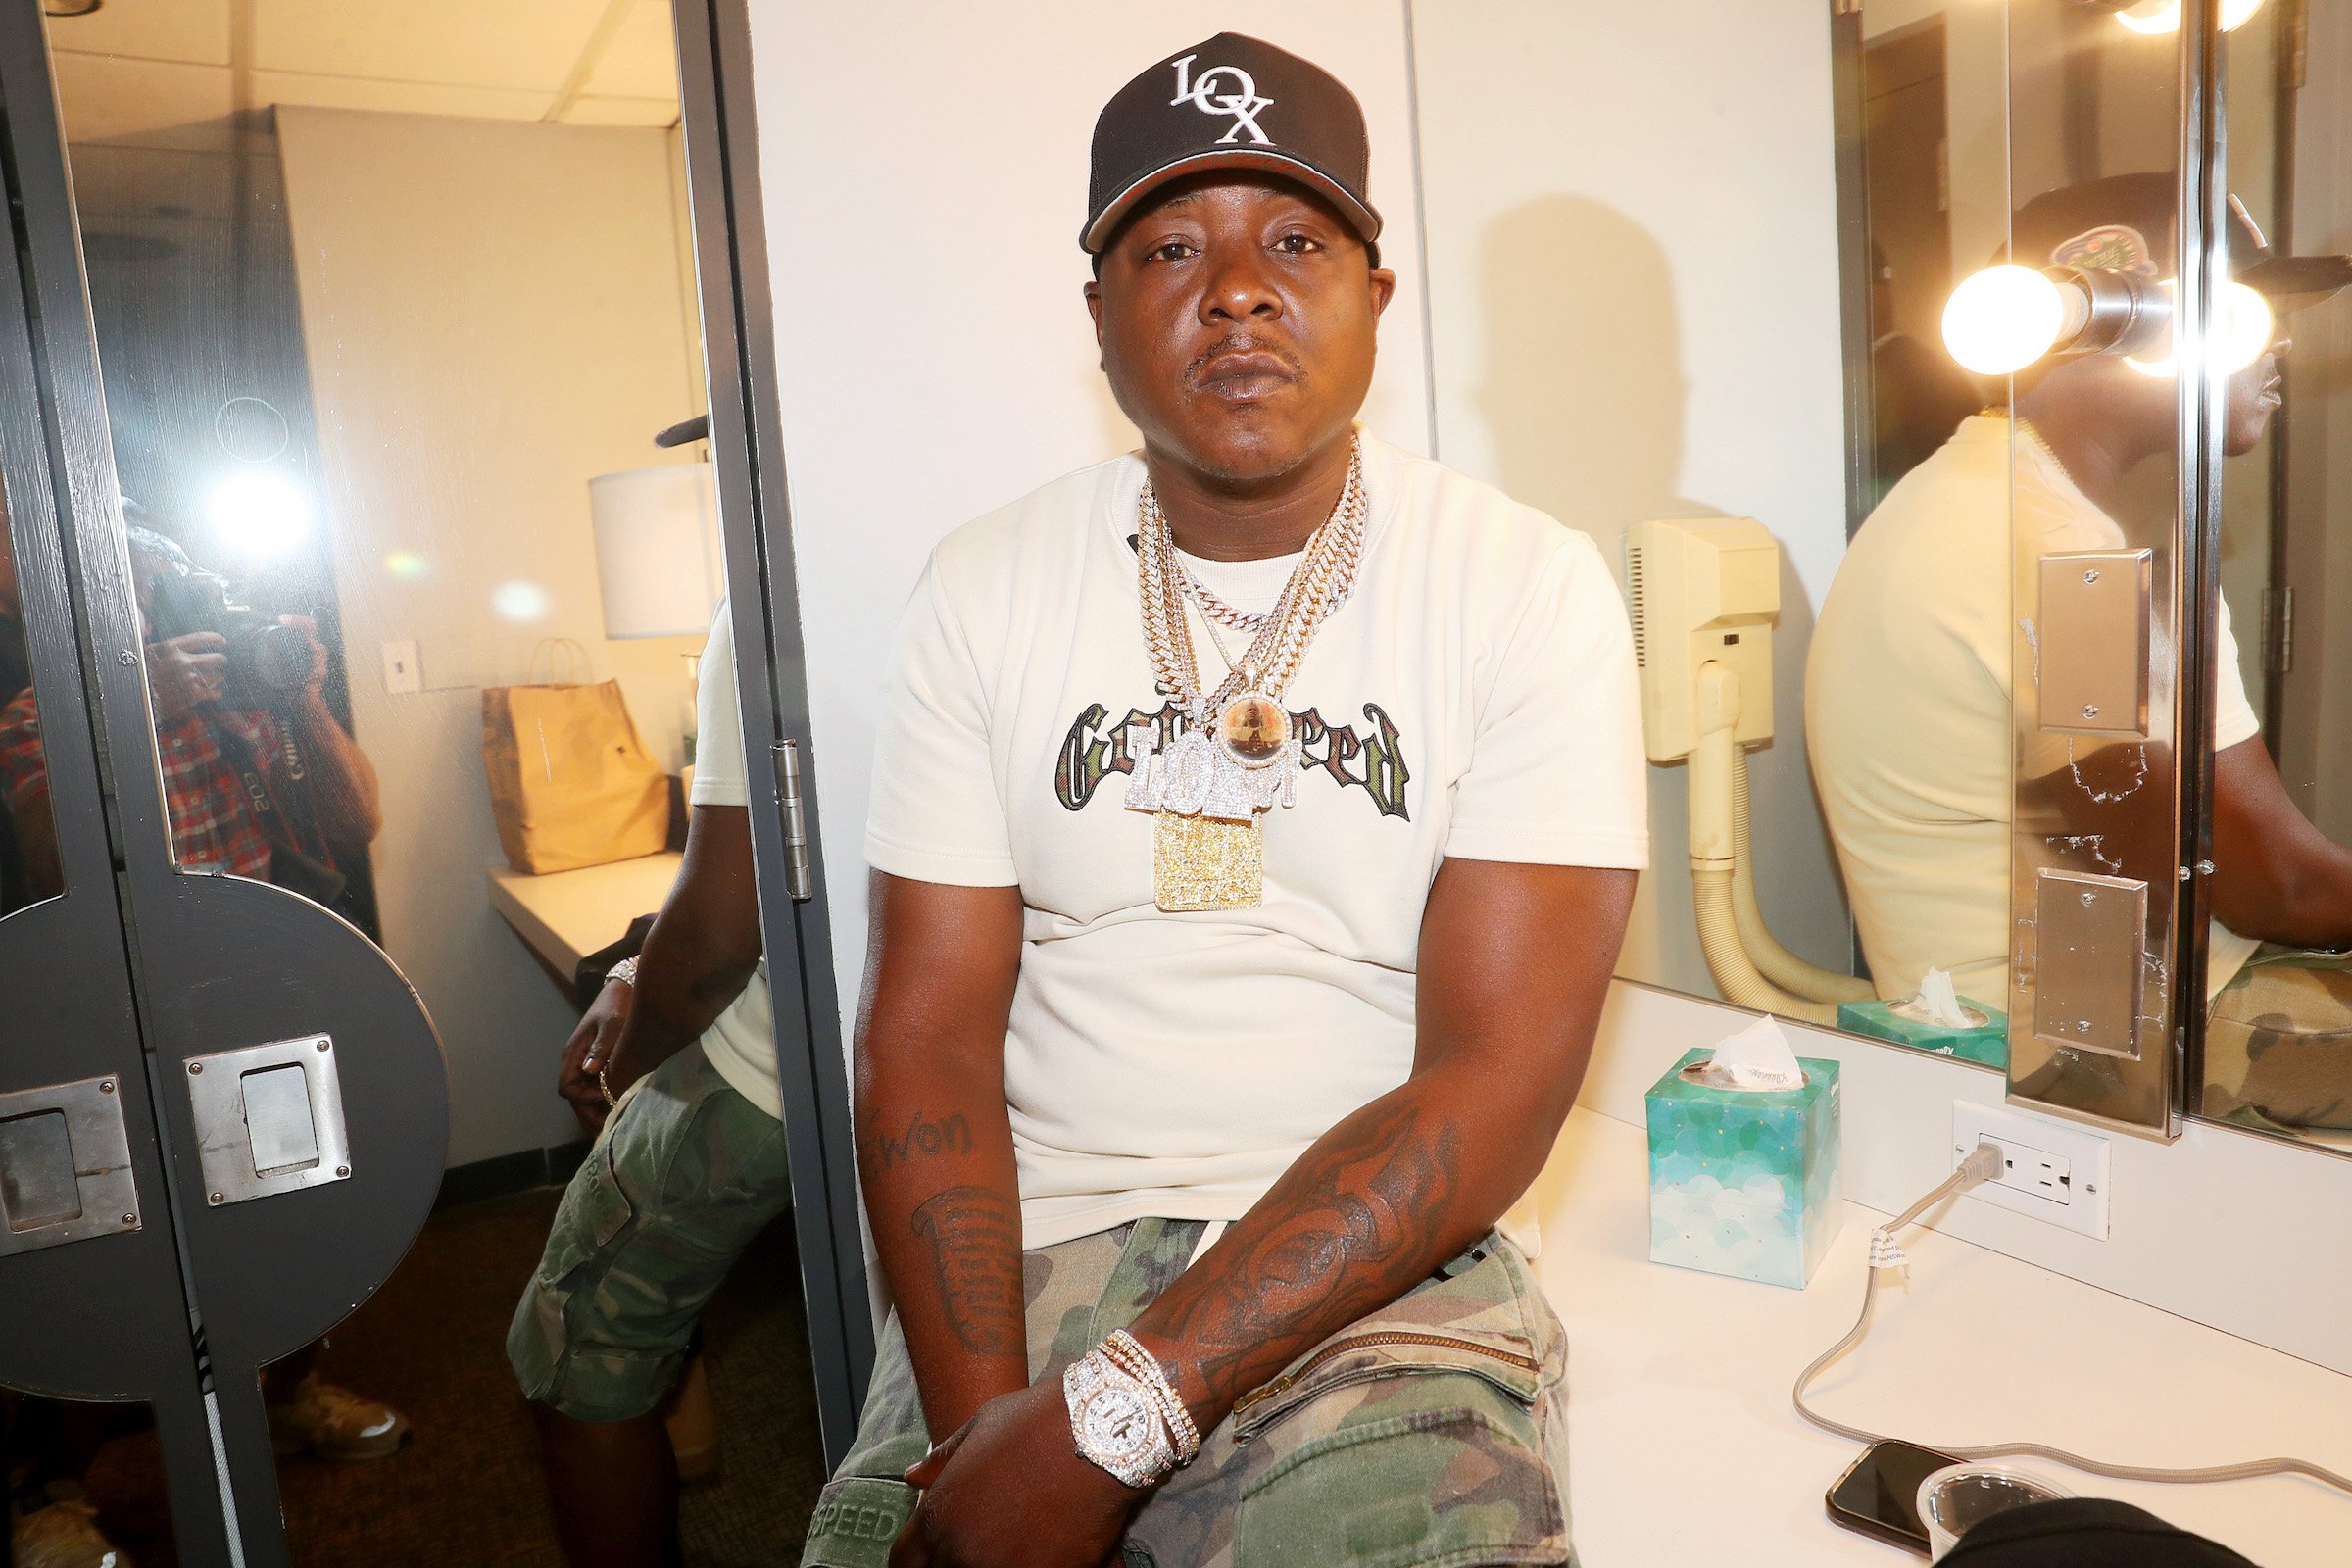 Jadakiss of The LOX poses backstage during Verzuz: The Lox Vs Dipset at Madison Square Garden